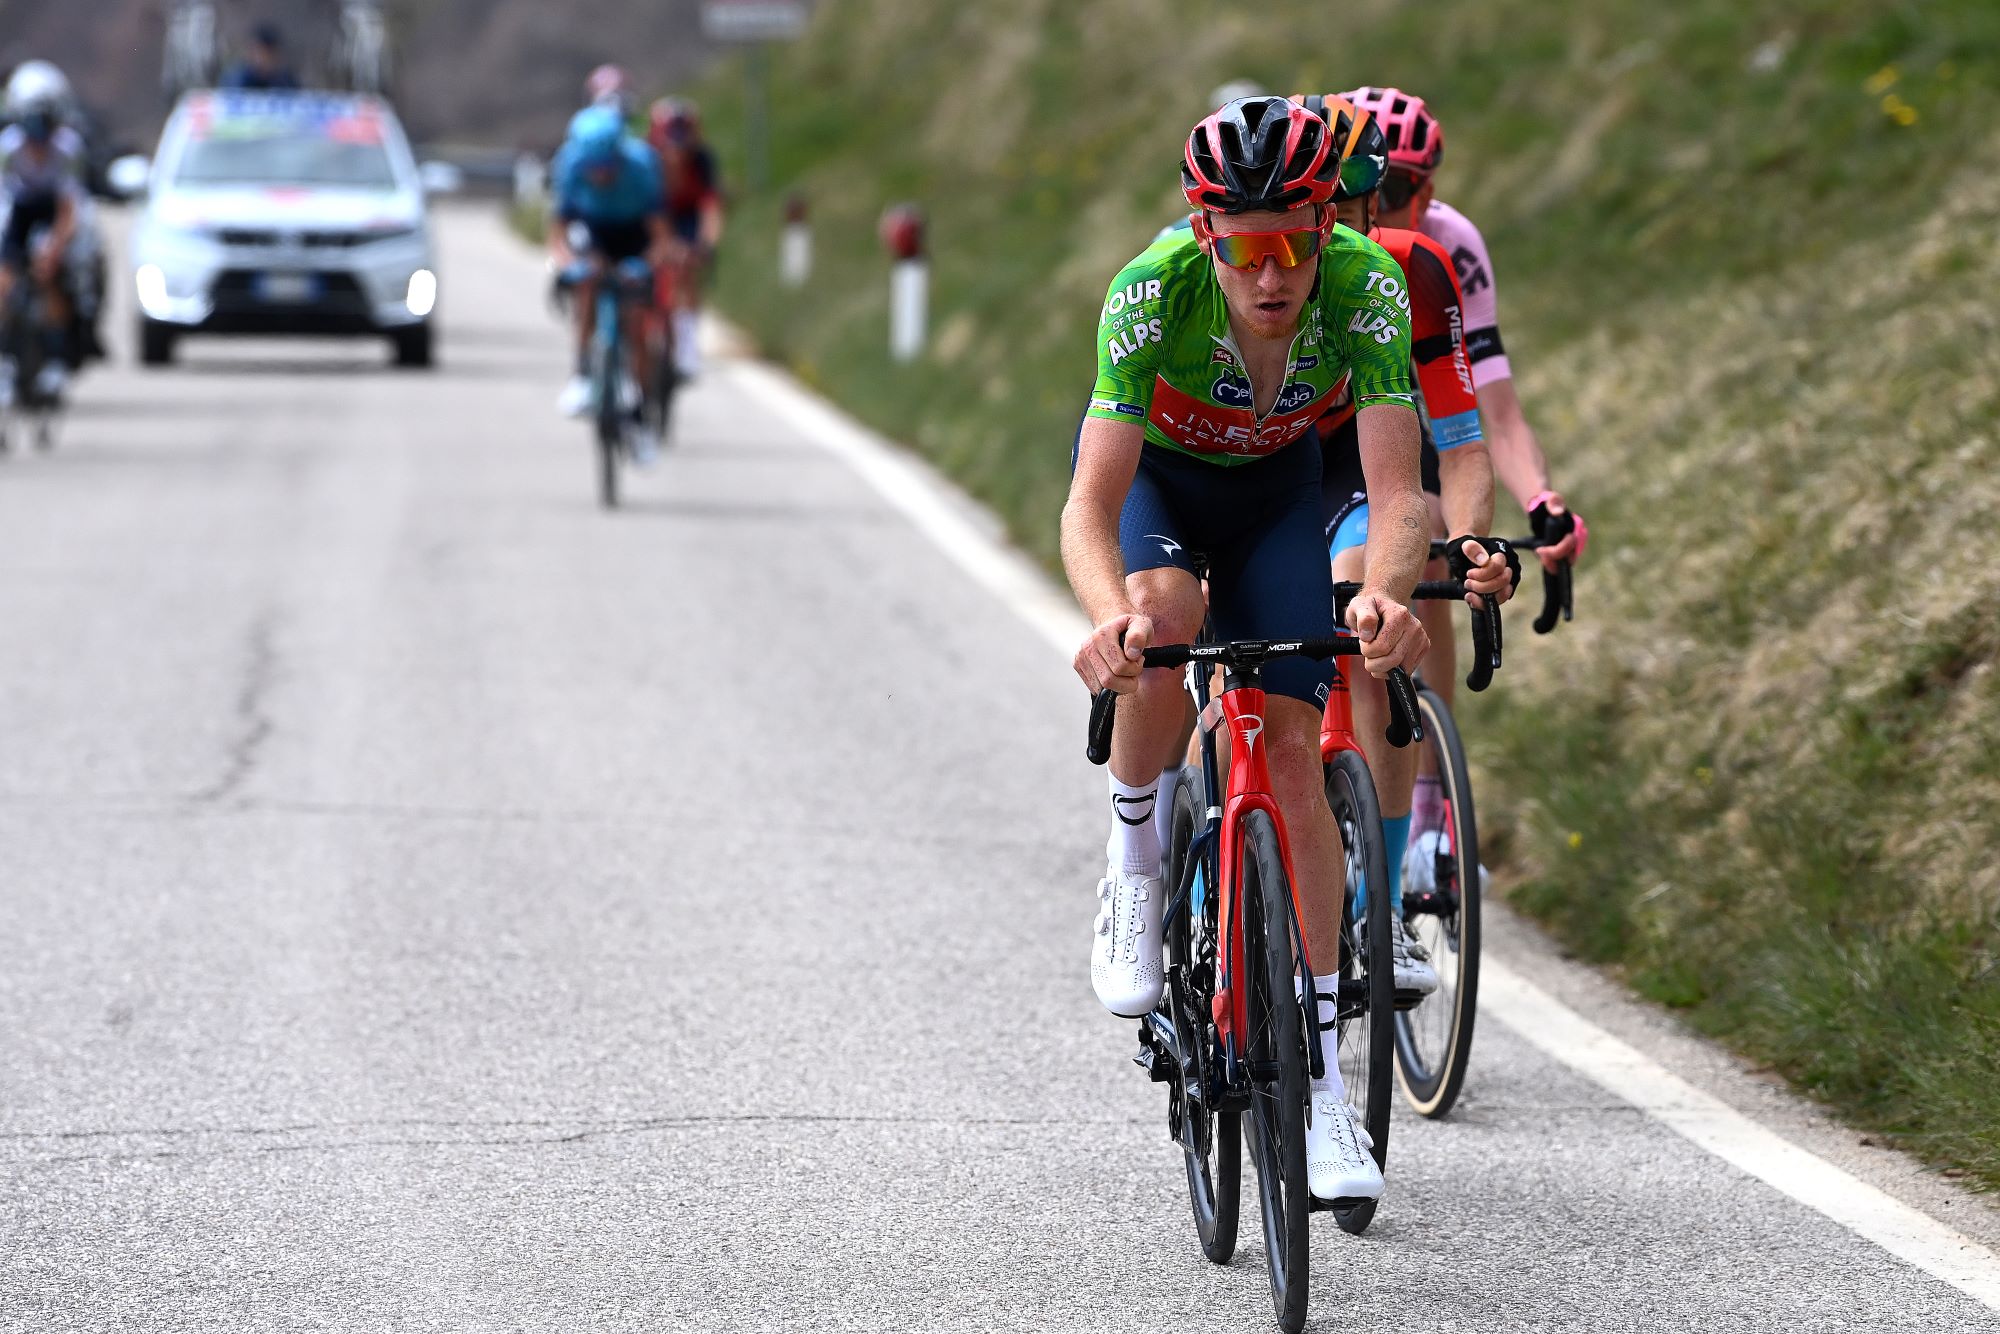 &lsquo;I&rsquo;m not going there as a favourite&rsquo; - Tao Geoghegan Hart plays down Giro d&rsquo;Italia chances despite success